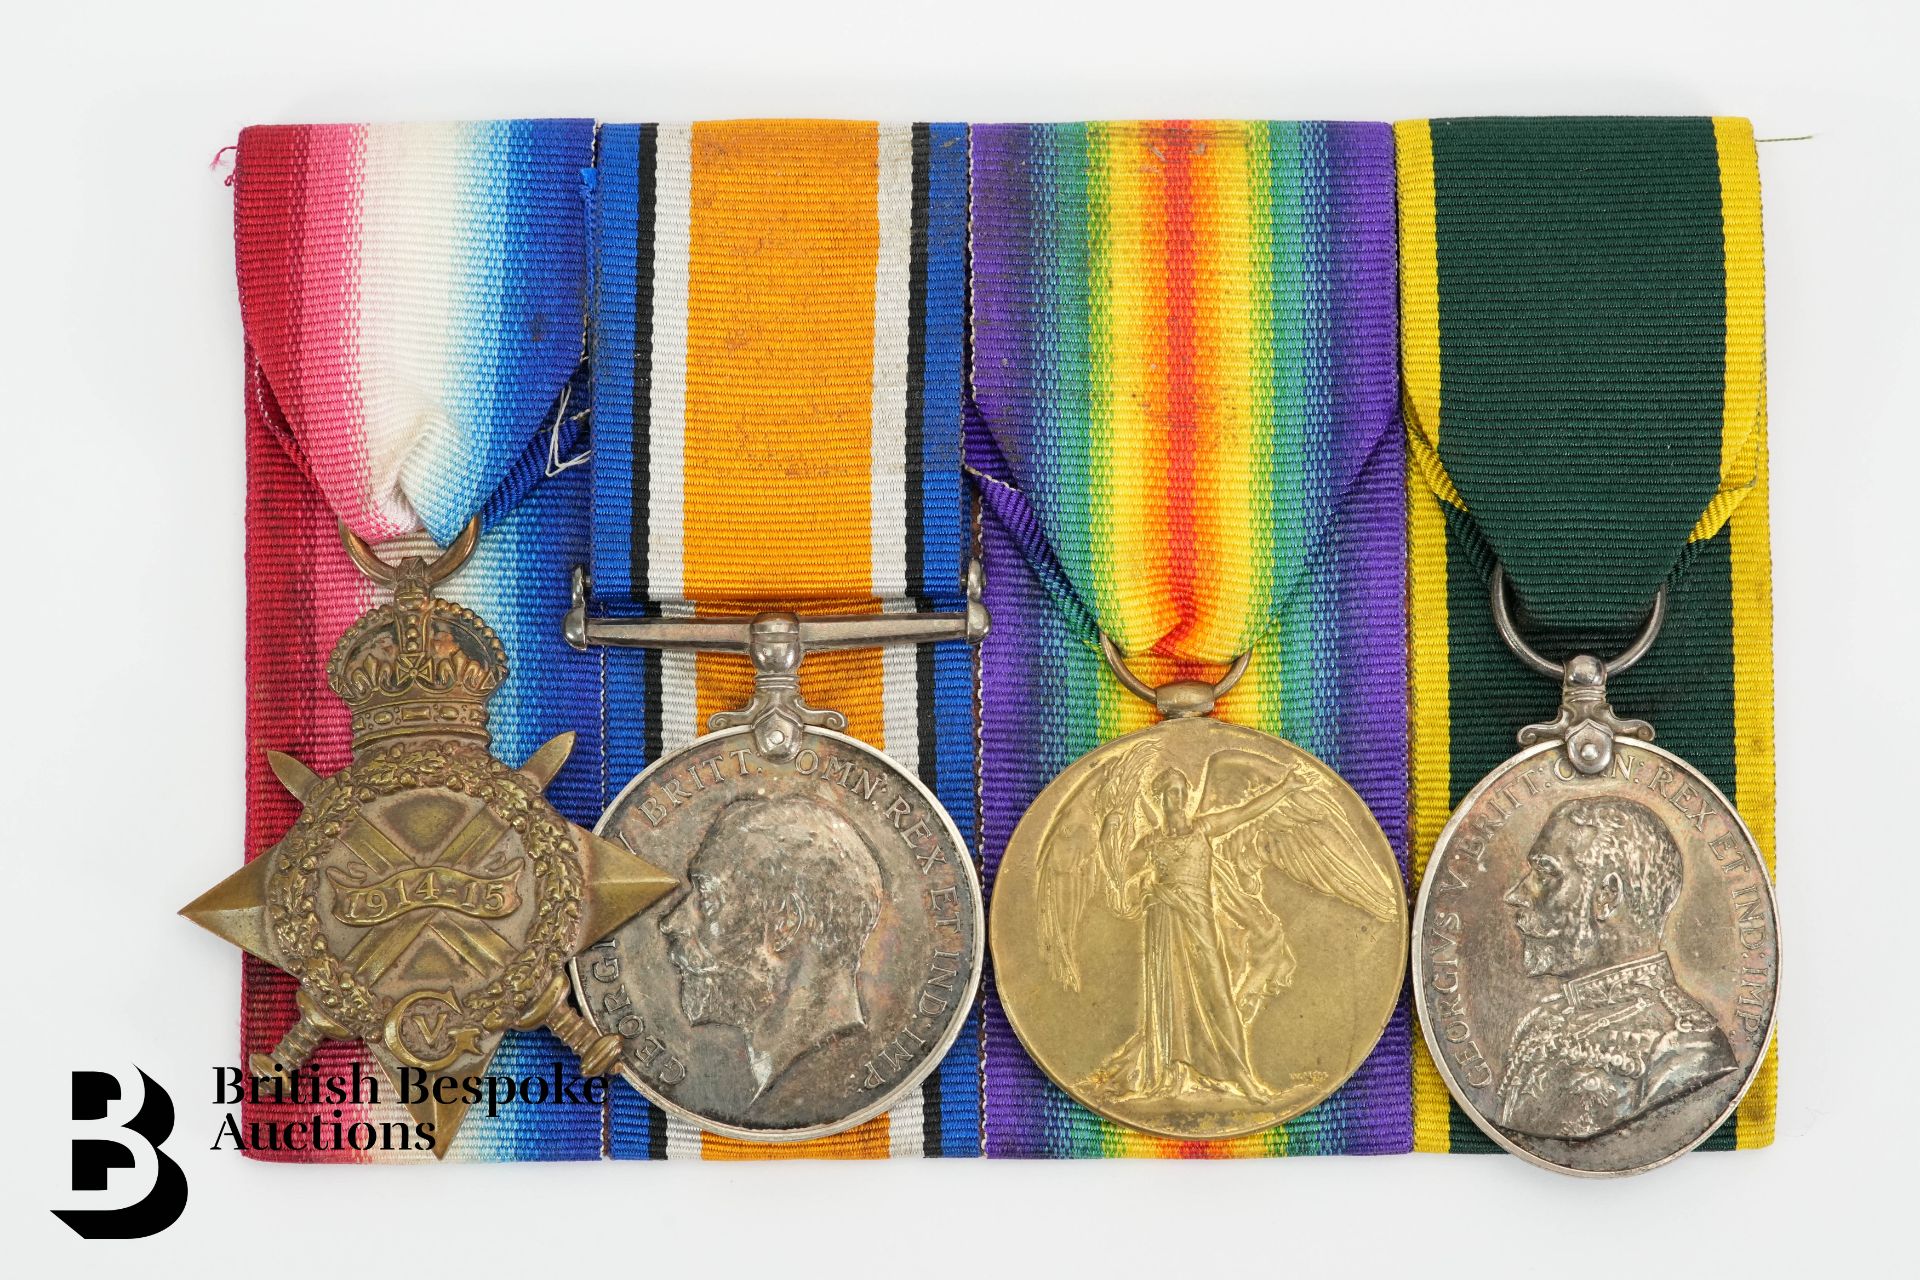 WWI Medal Group